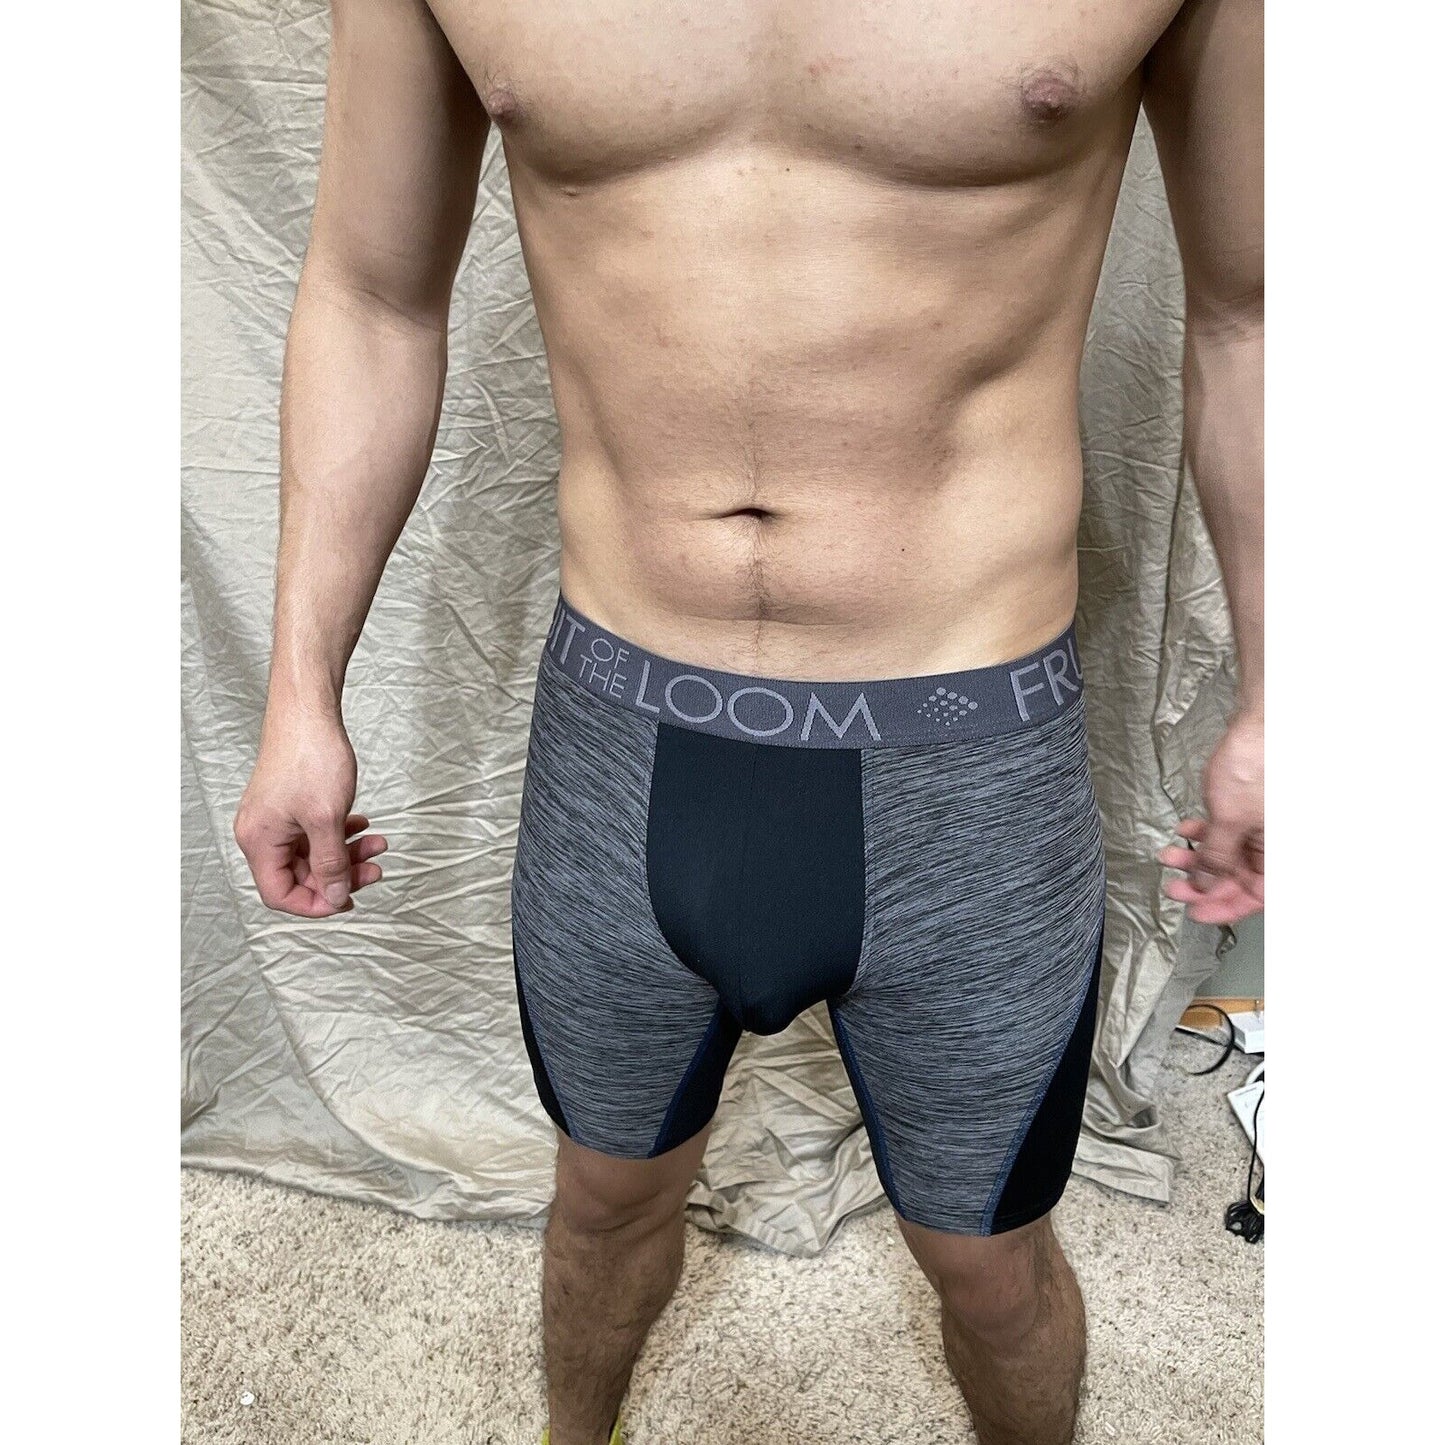 men's fruit of the loom black And Gray compression boxer shorts breathable  S